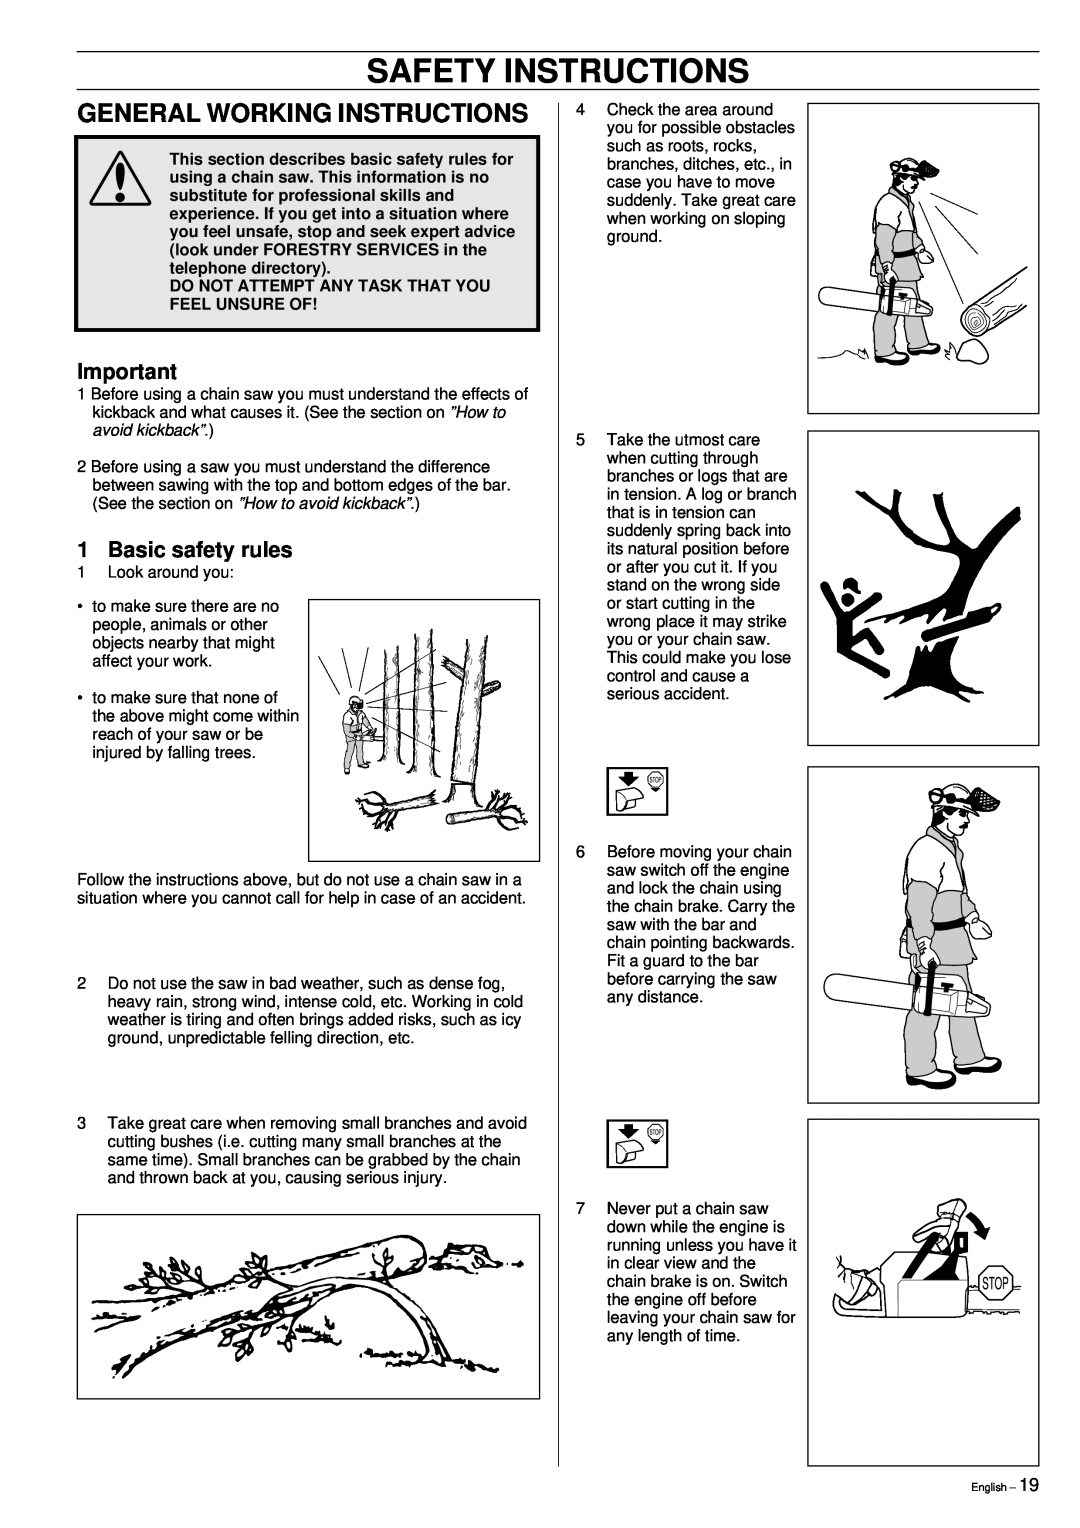 Husqvarna 355 manual General Working Instructions, Basic safety rules, Safety Instructions 